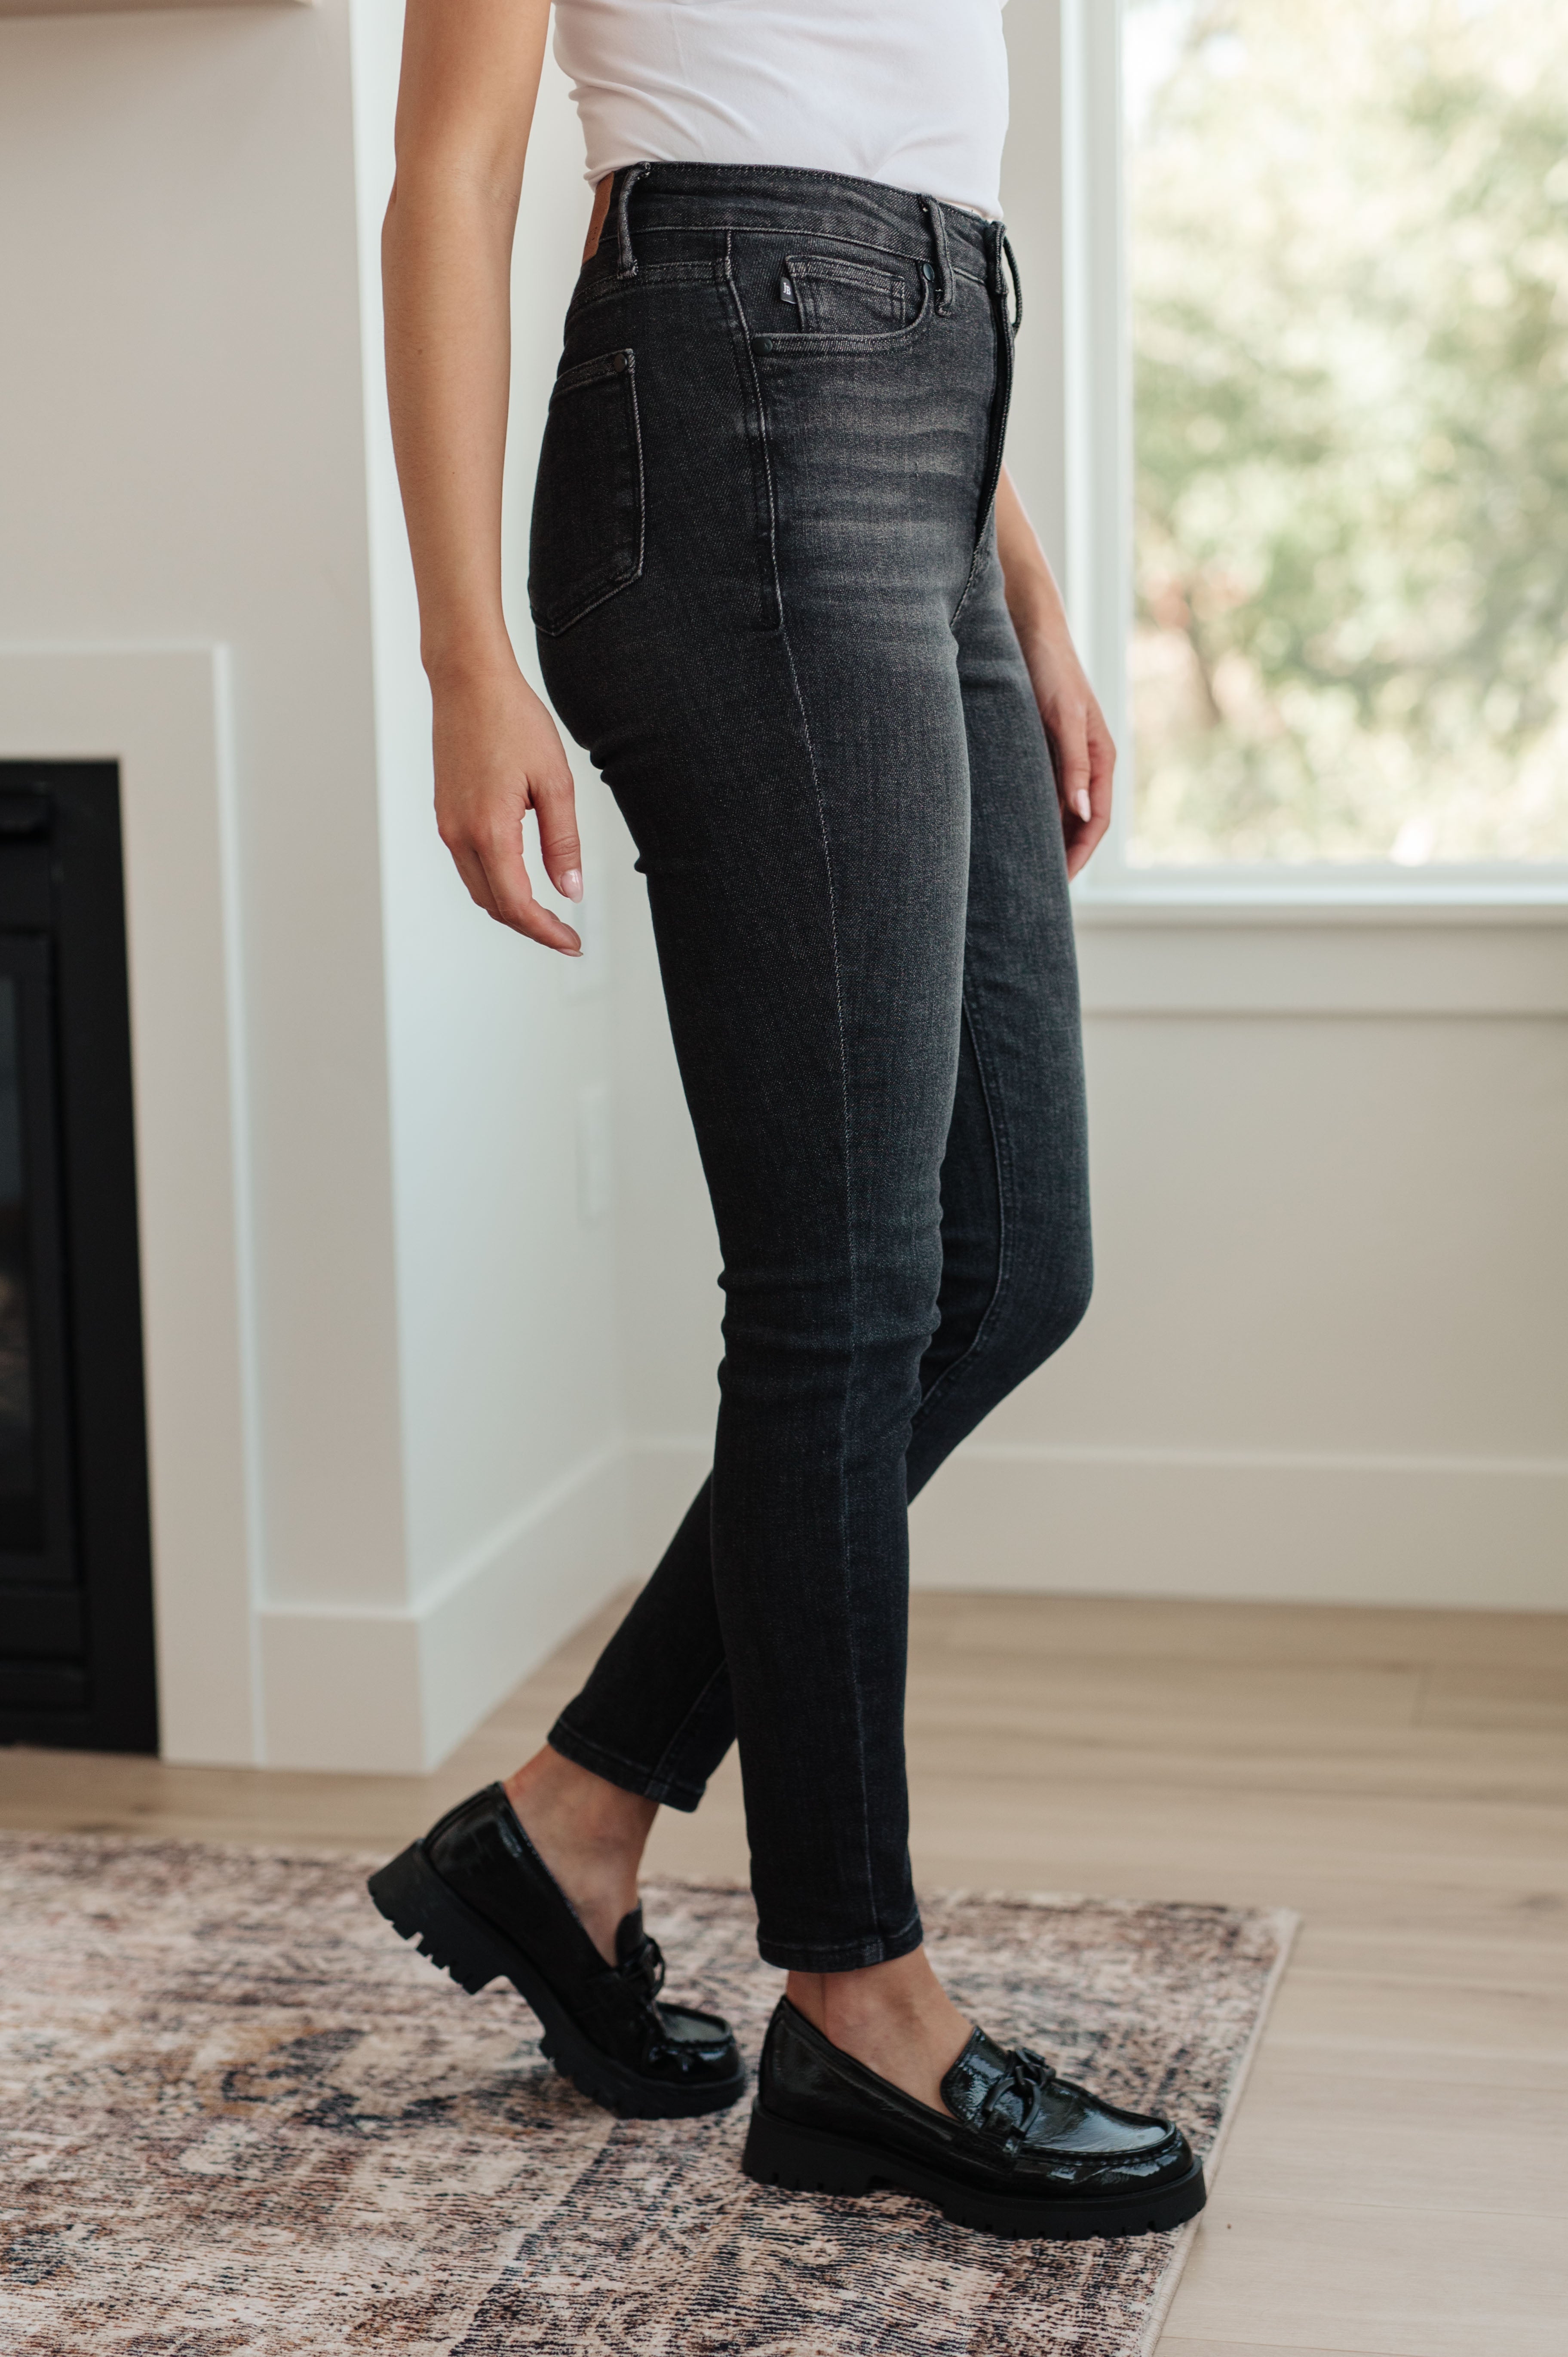 Judy Blue Octavia High Rise Tummy Control Top Skinny Jeans in Washed Black Ave Shops 11-13-23